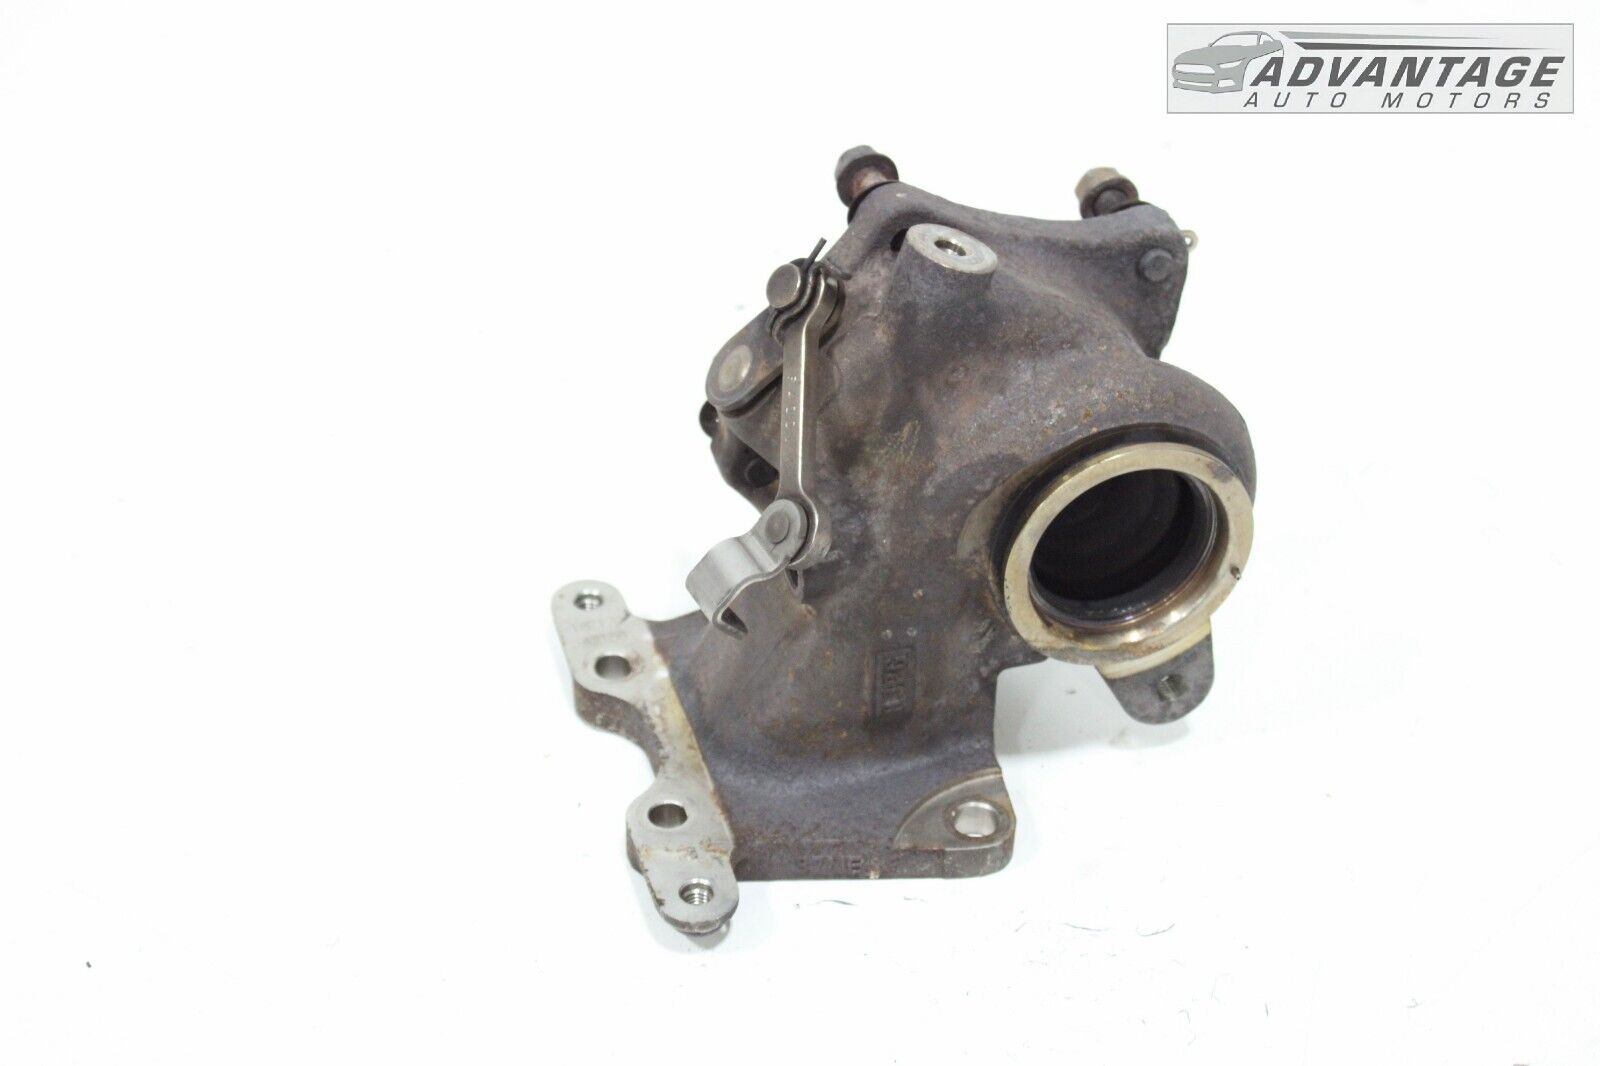 2018-2021 HONDA ACCORD FWD 1.5L ENGINE TURBO CHARGER TURBOCHARGER HOT PART OEM